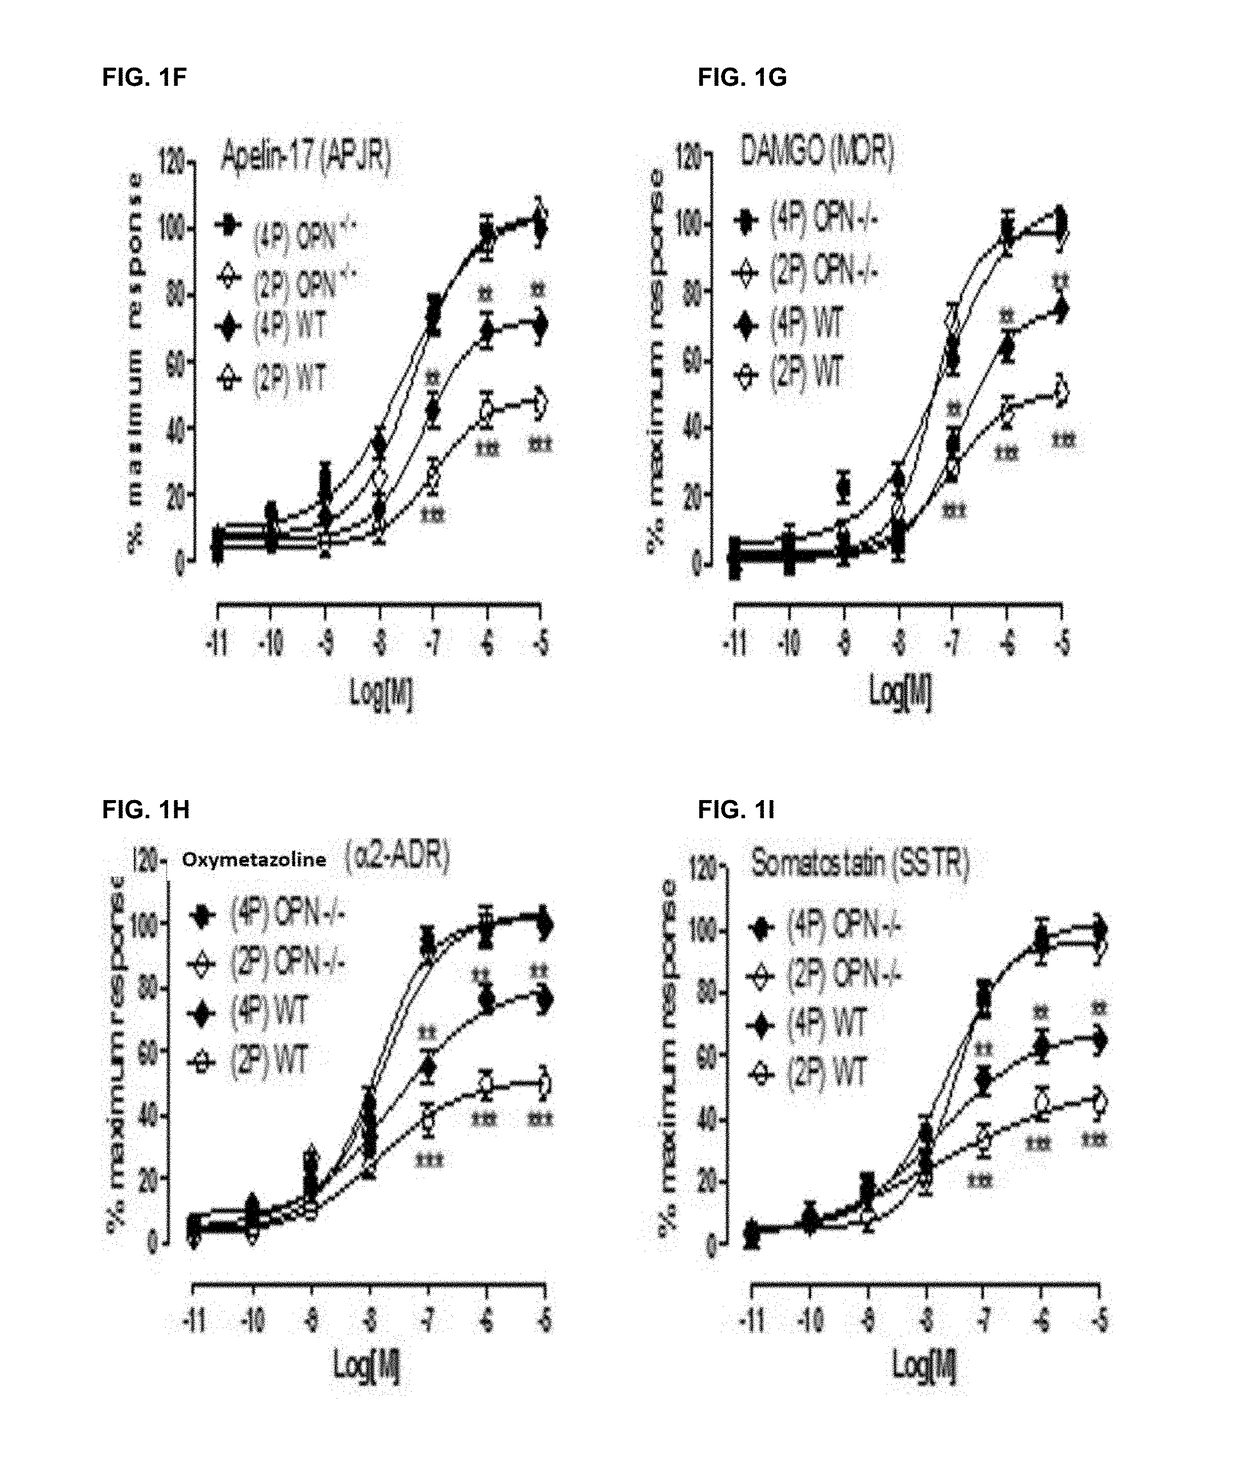 Method of Increasing GIPCR Signalization in the Cells of a Scoliotic Subject